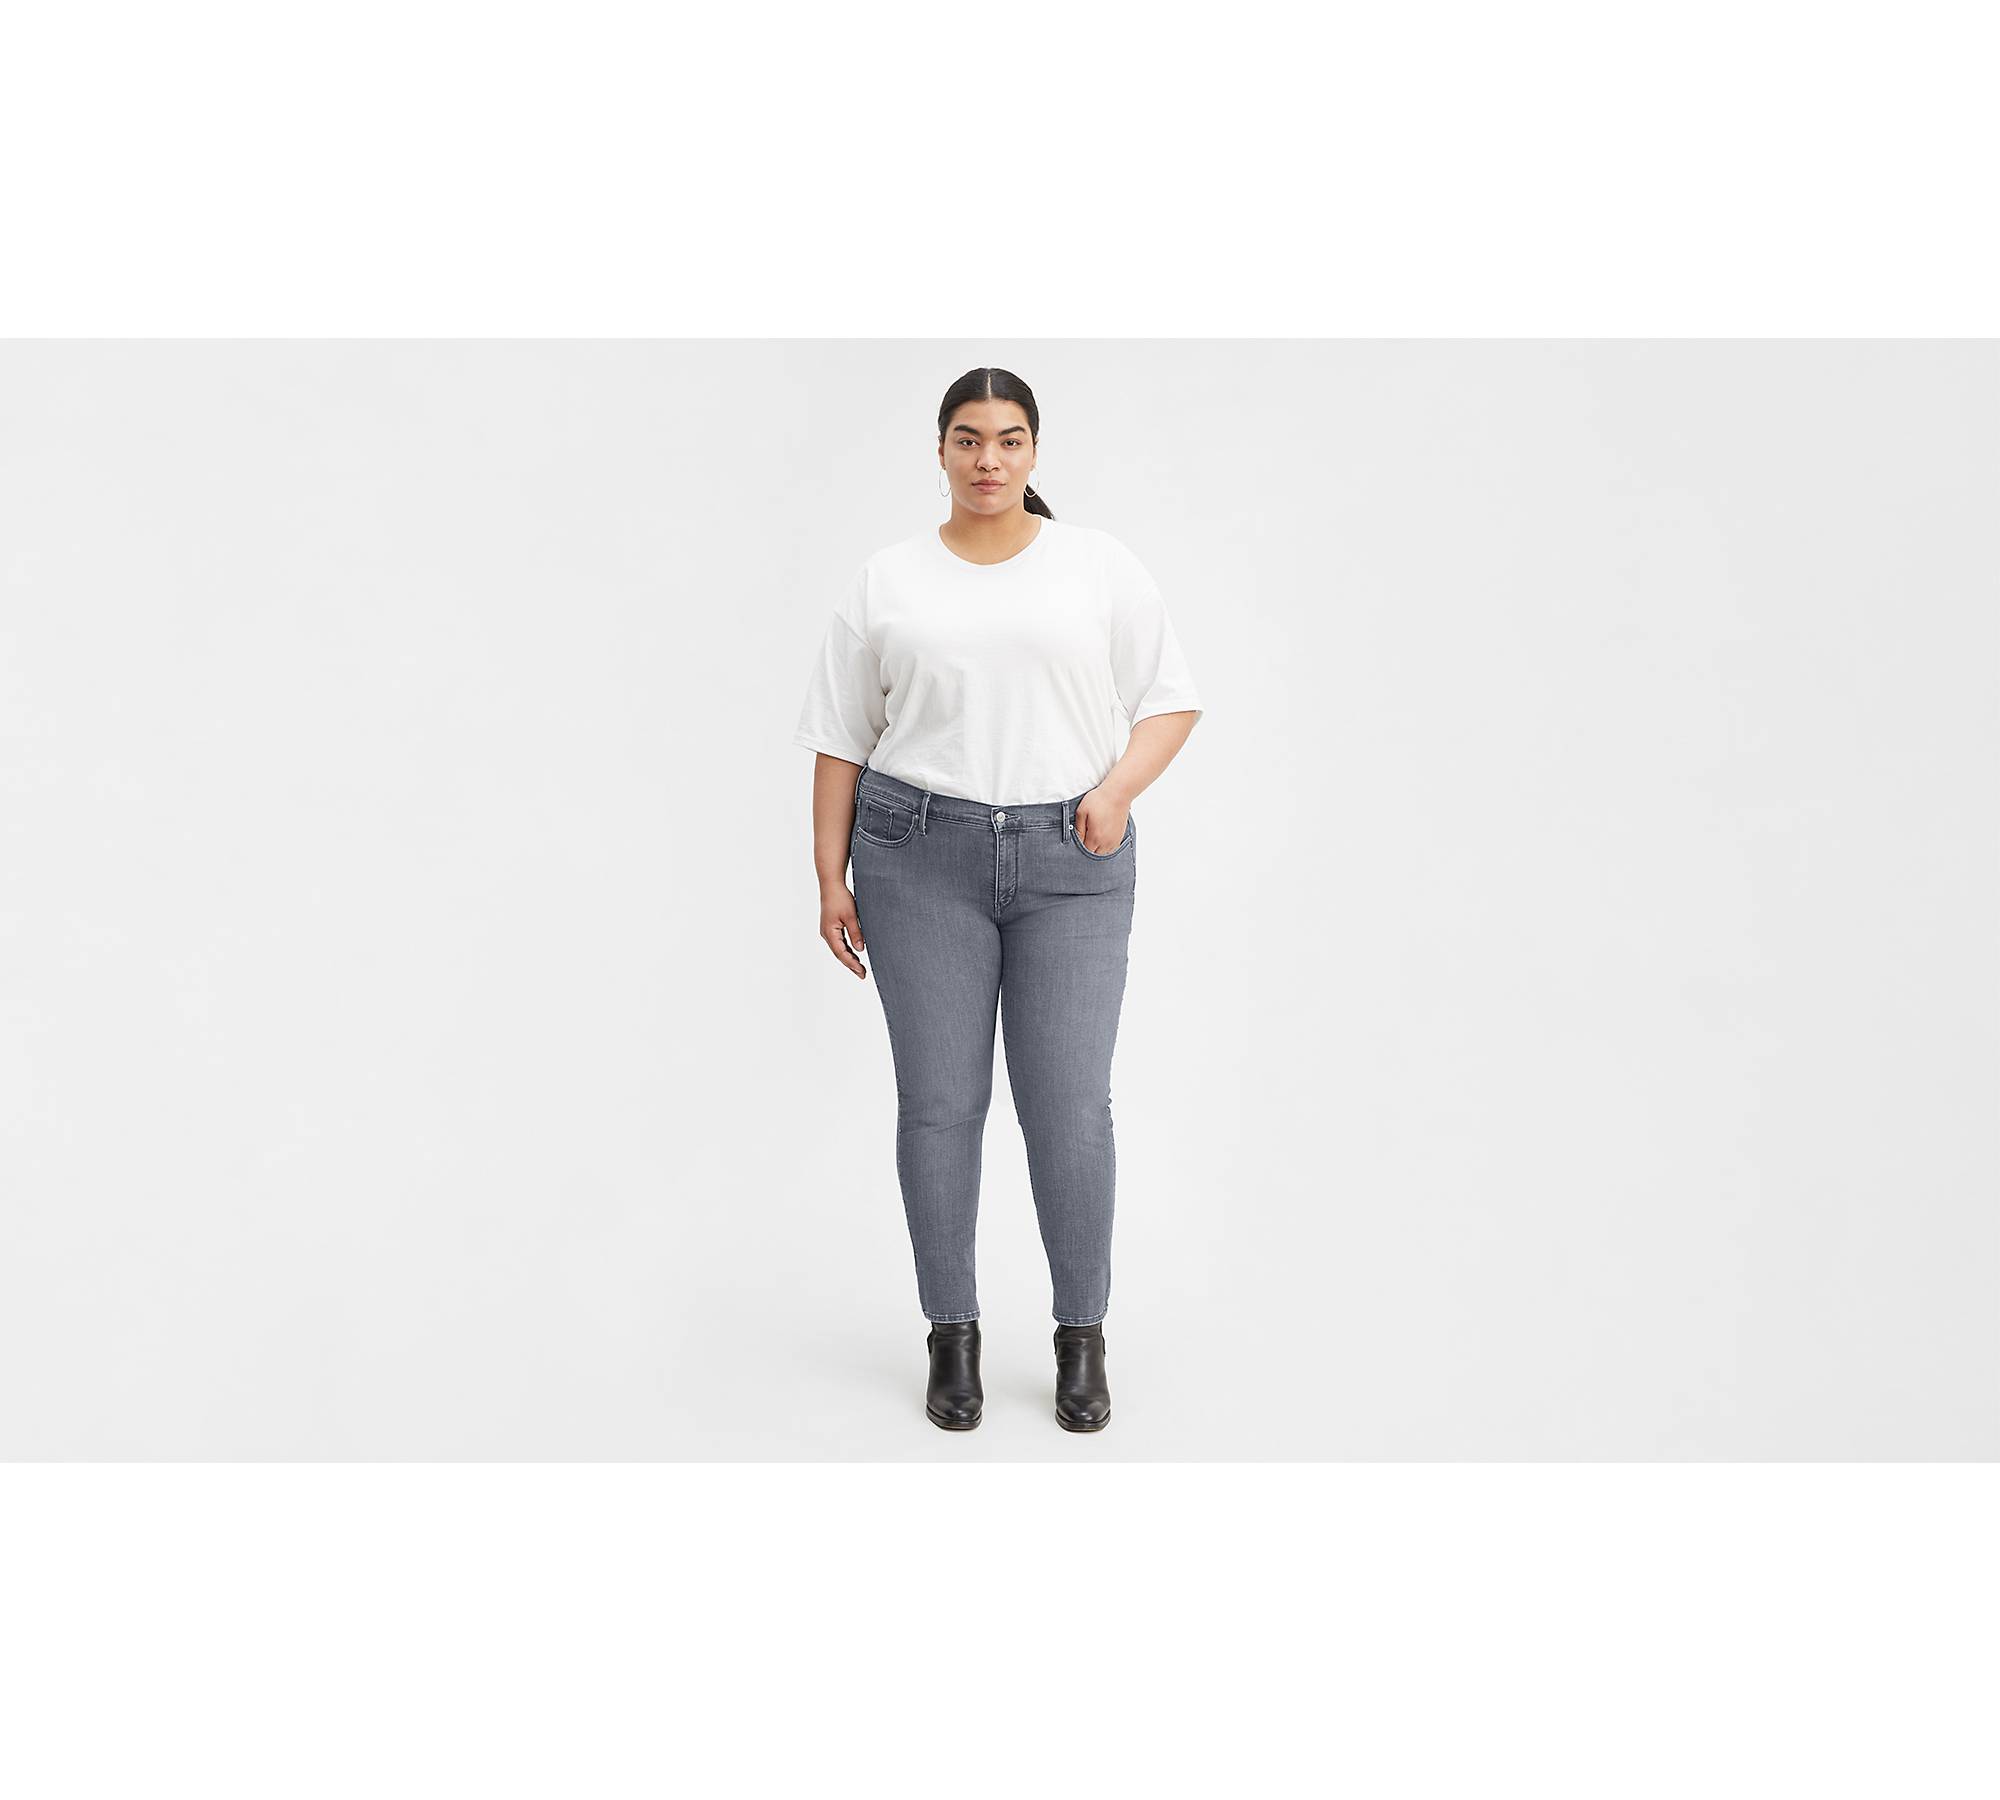 Plus Size Jeans for Your Shape